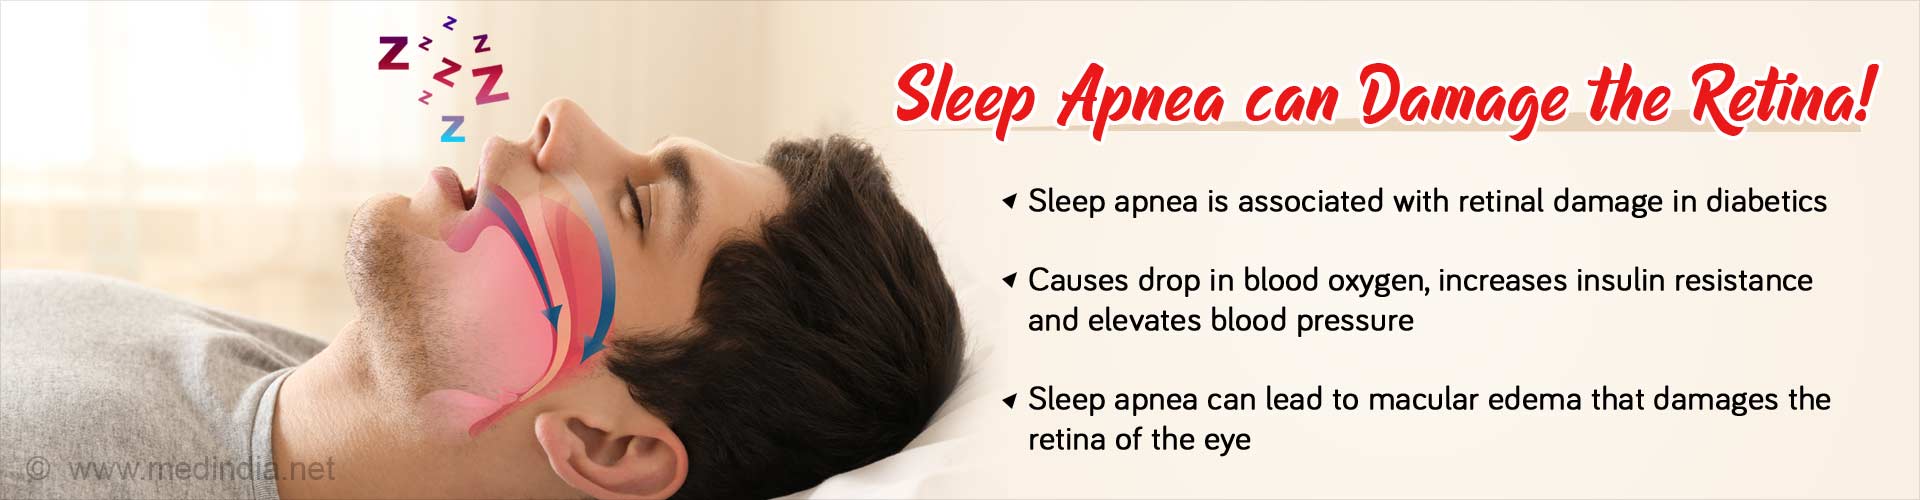 Sleep apnea can damage the retina. Sleep apnea is associated with retinal damage in diabetics. It causes drop in blood oxygen, increases insulin resistance and elevates blood pressure. Sleep apnea can lead to macular edema that damages the retina of the eye.